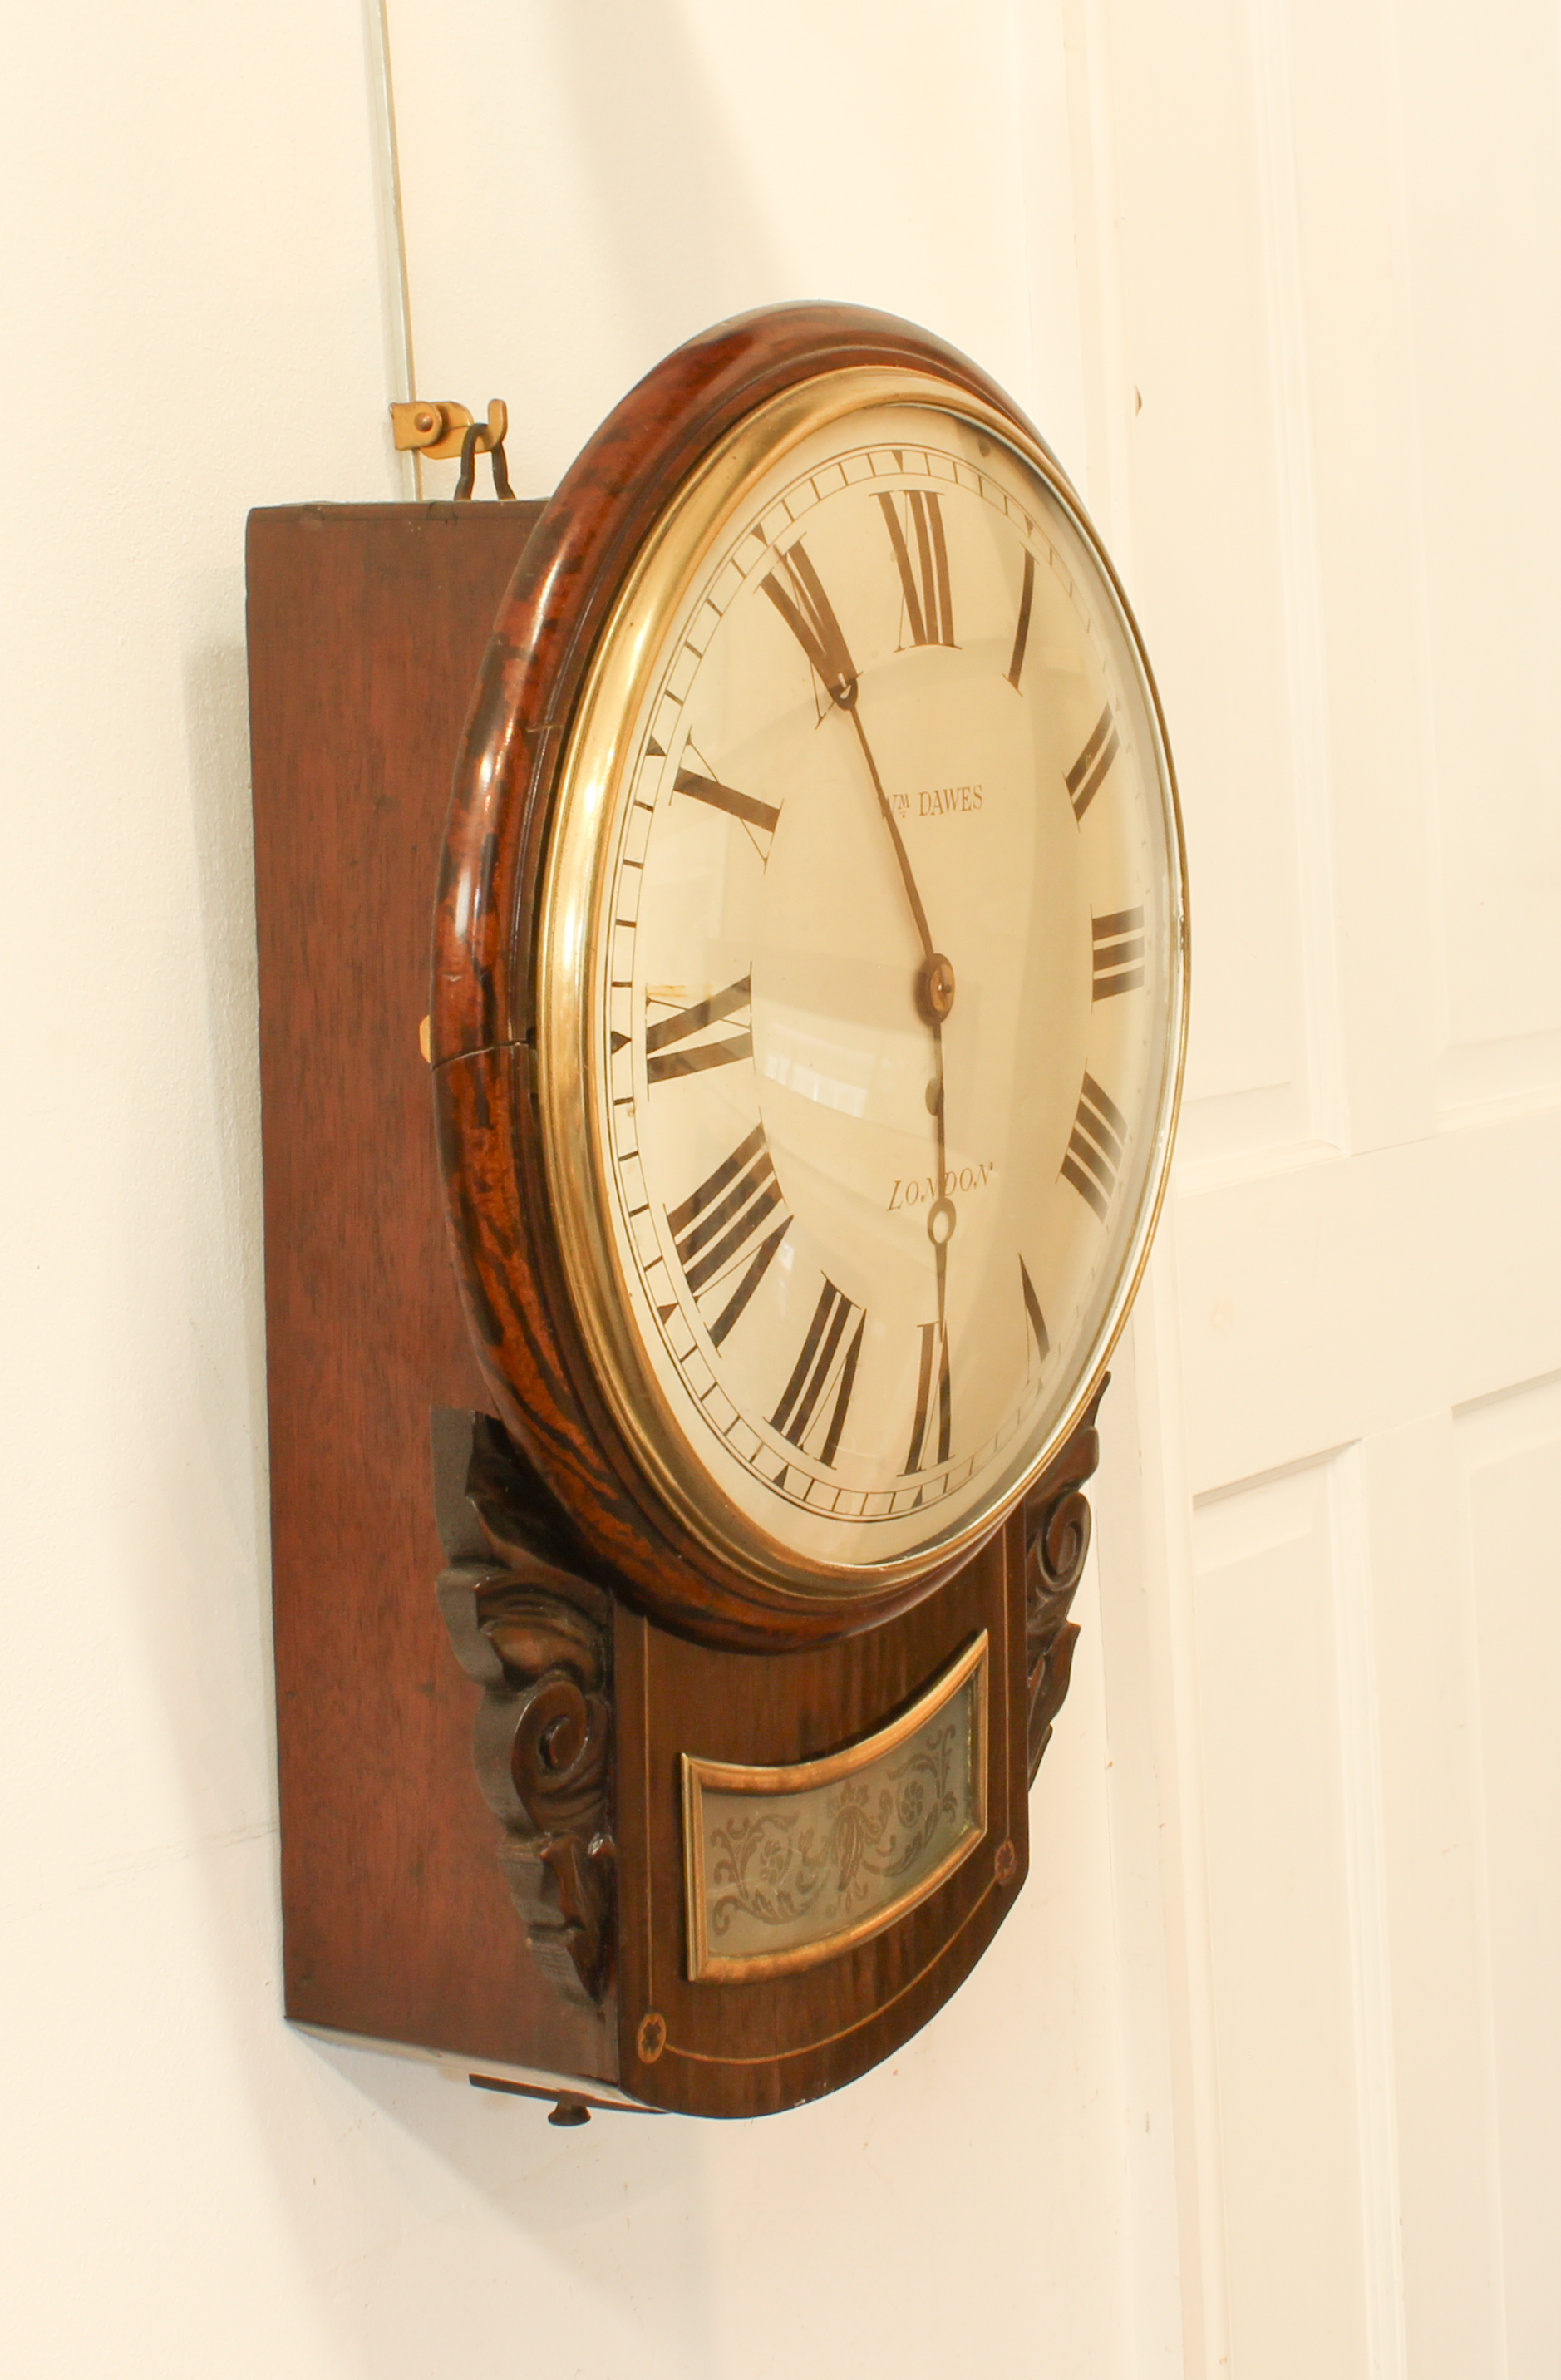 A 19th century William Dawes (London) drop dial wall clock - cream dial with Roman numerals, the - Image 2 of 4